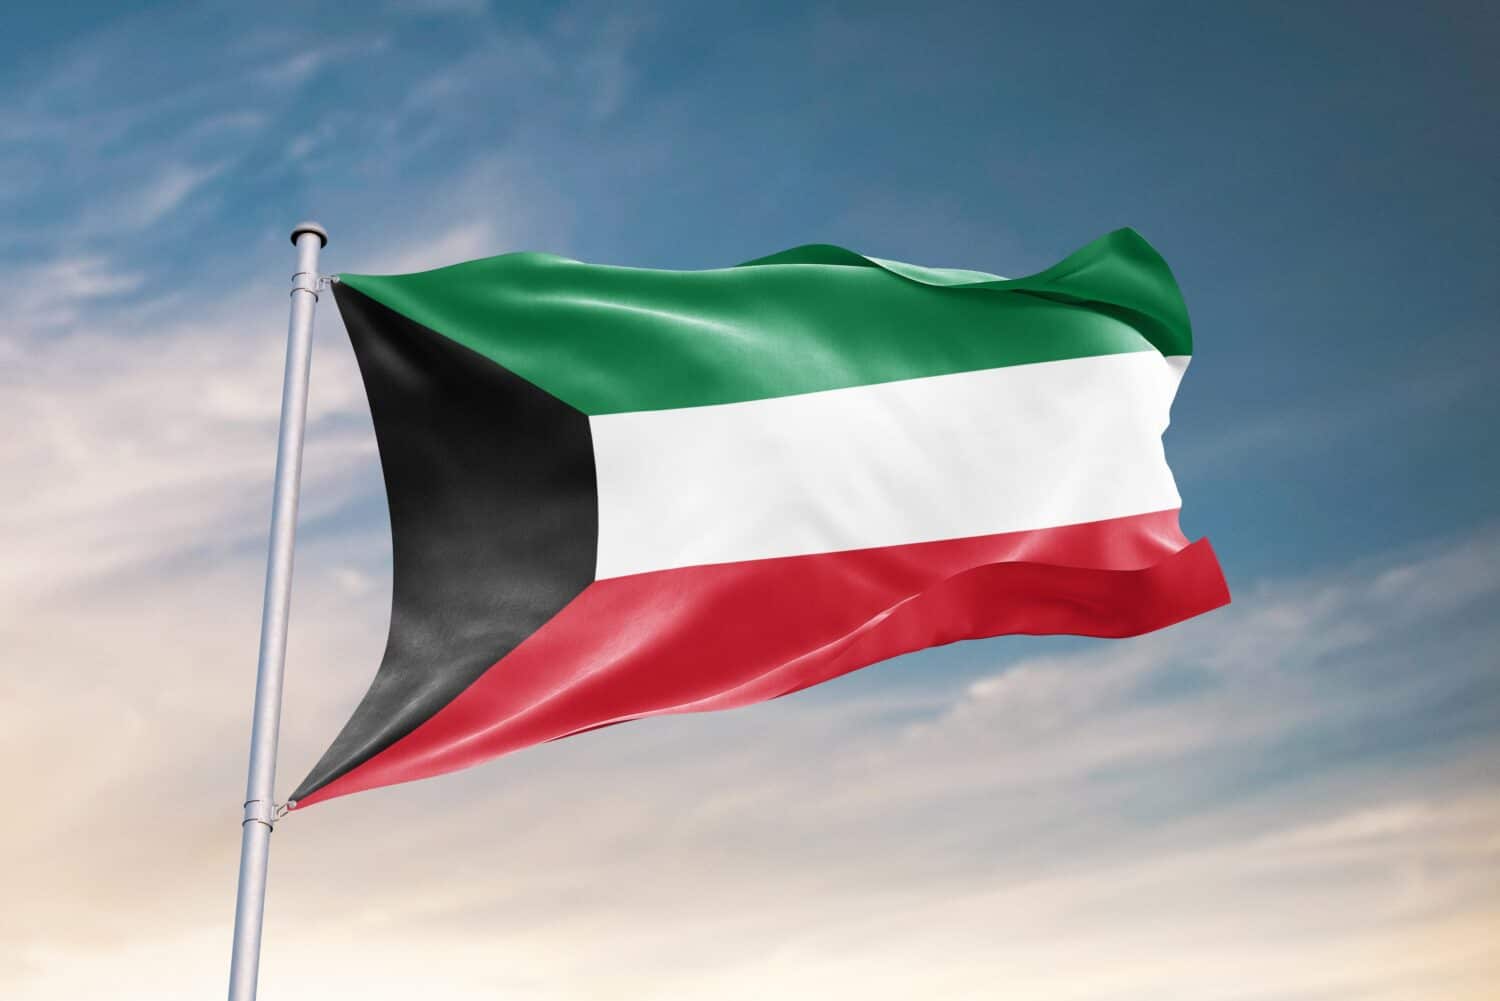 Waving flag of Kuwait in beautiful sky. Kuwait flag for independence day. The symbol of the state on wavy fabric.